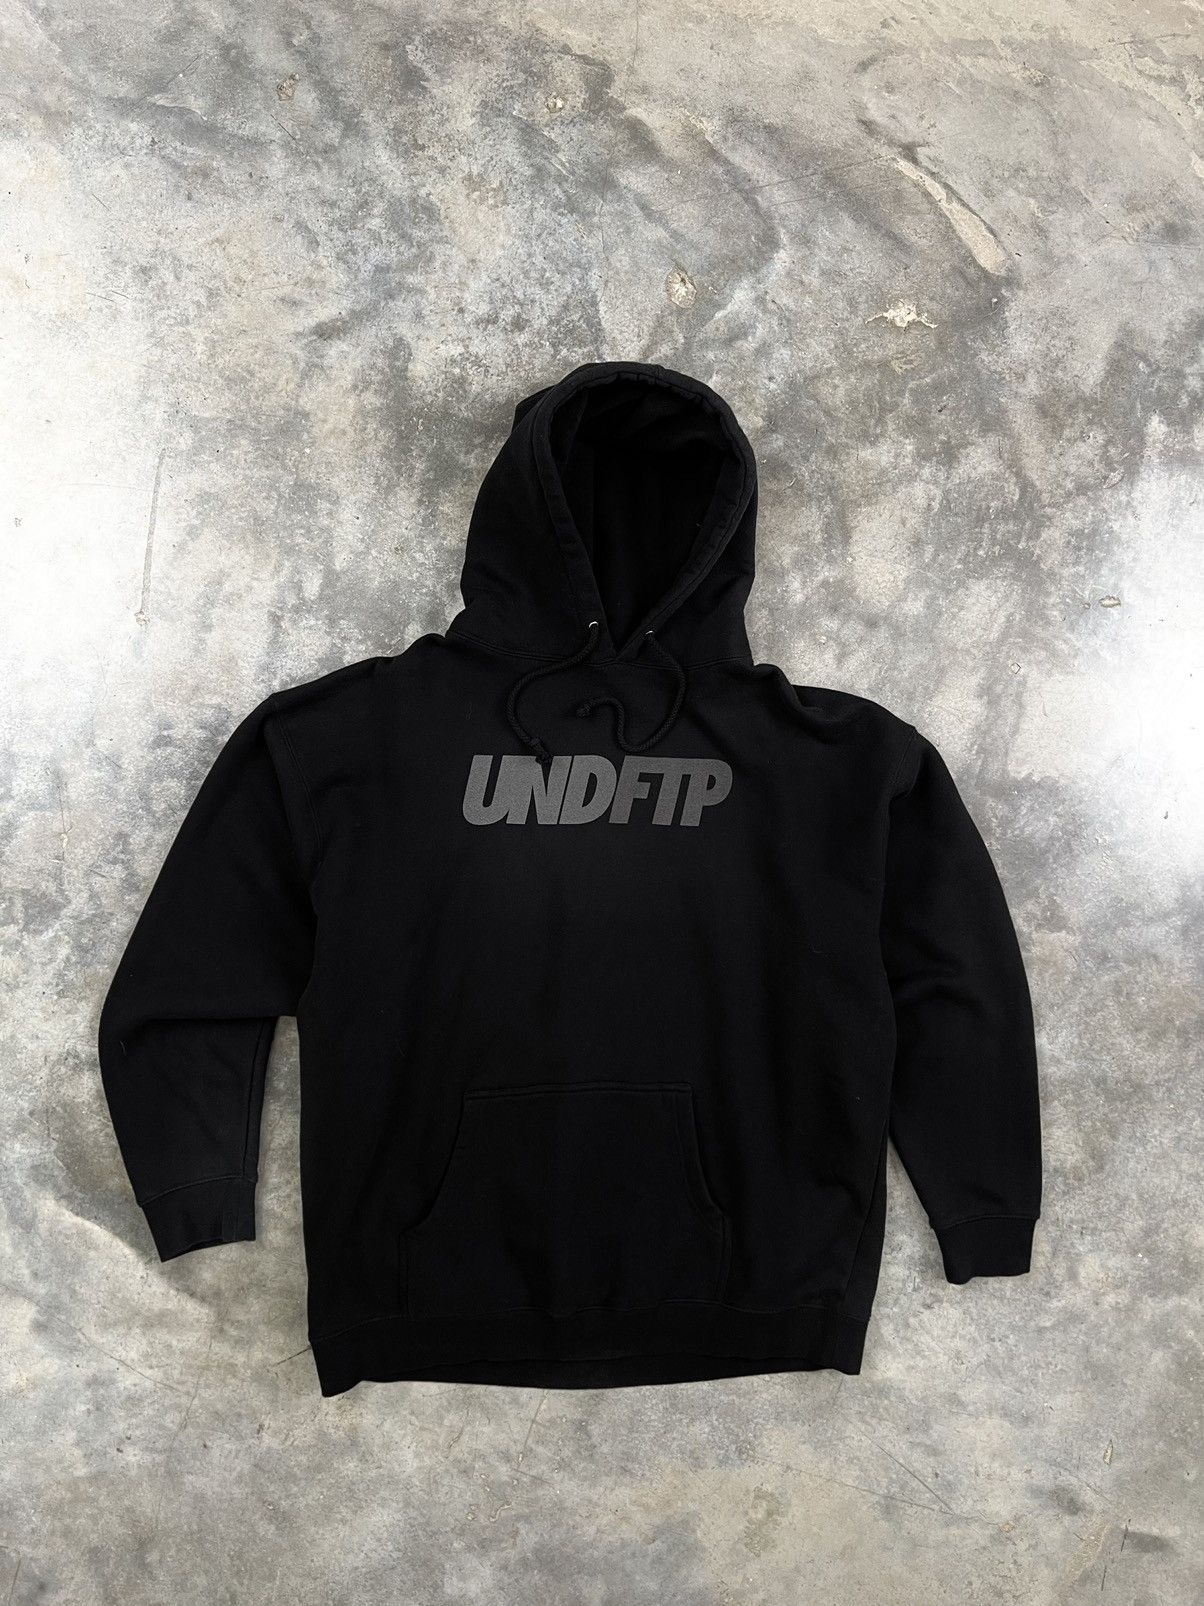 Undefeated Fuck The Population x Undefeated Black 3M Logo Hoodie XL ❄️ |  Grailed